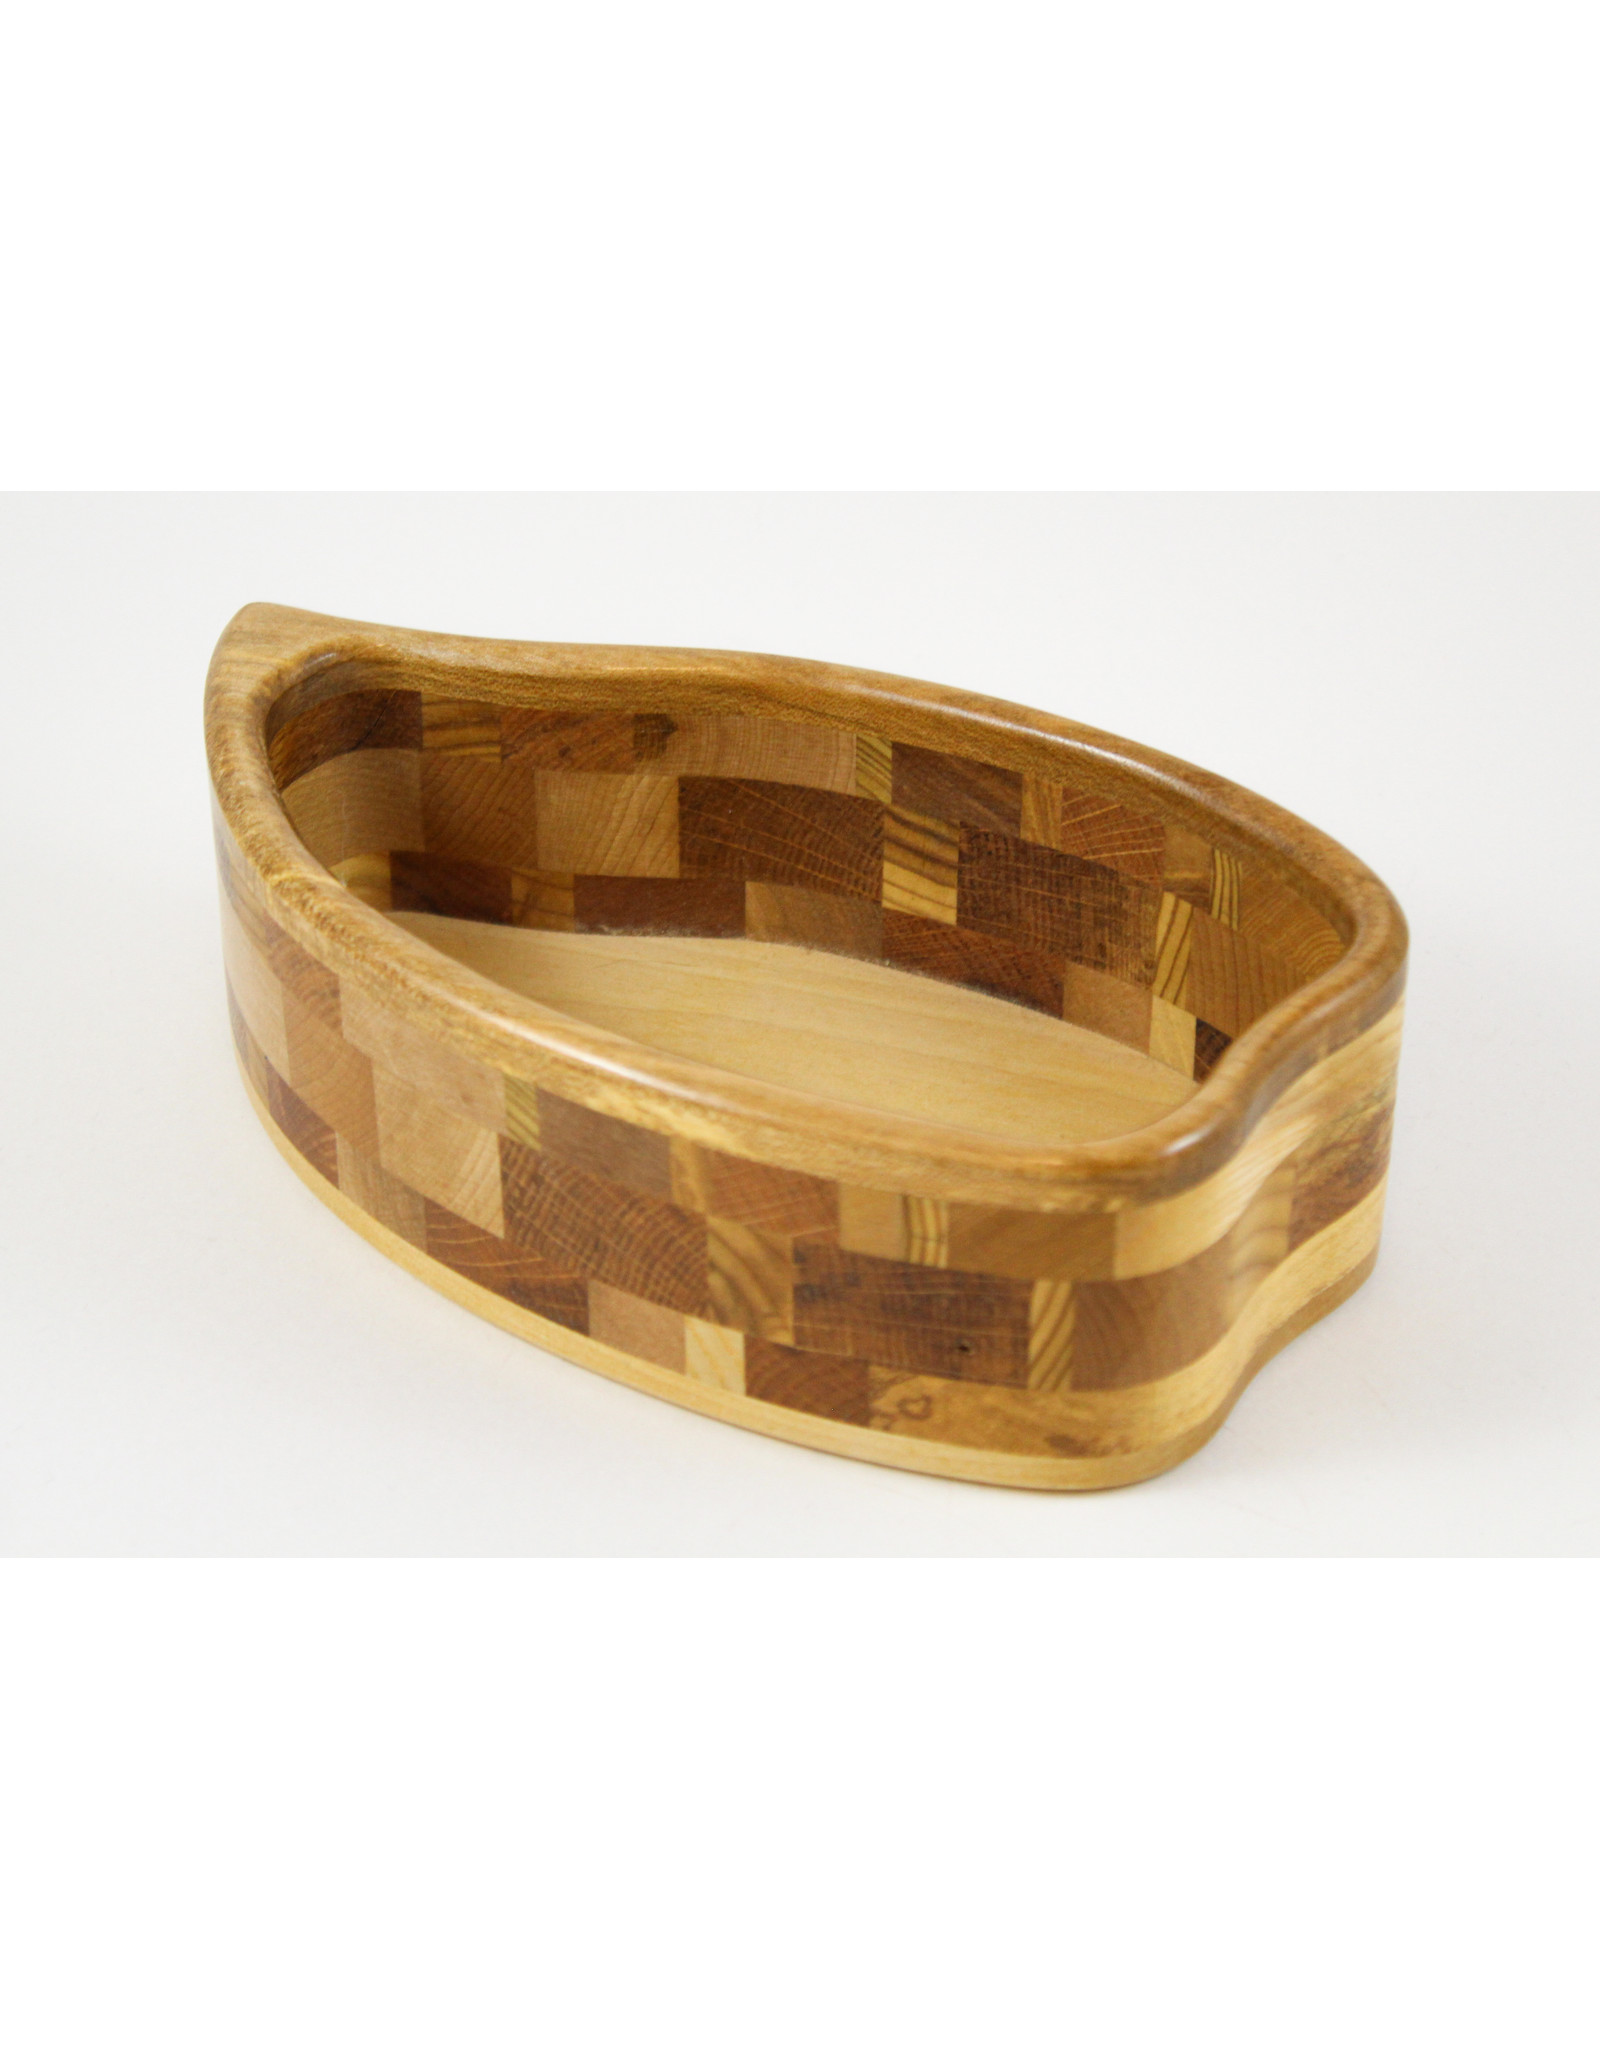 Robert Evans/Woodsmiths Oval and Leaf Boxes by Woodsmiths